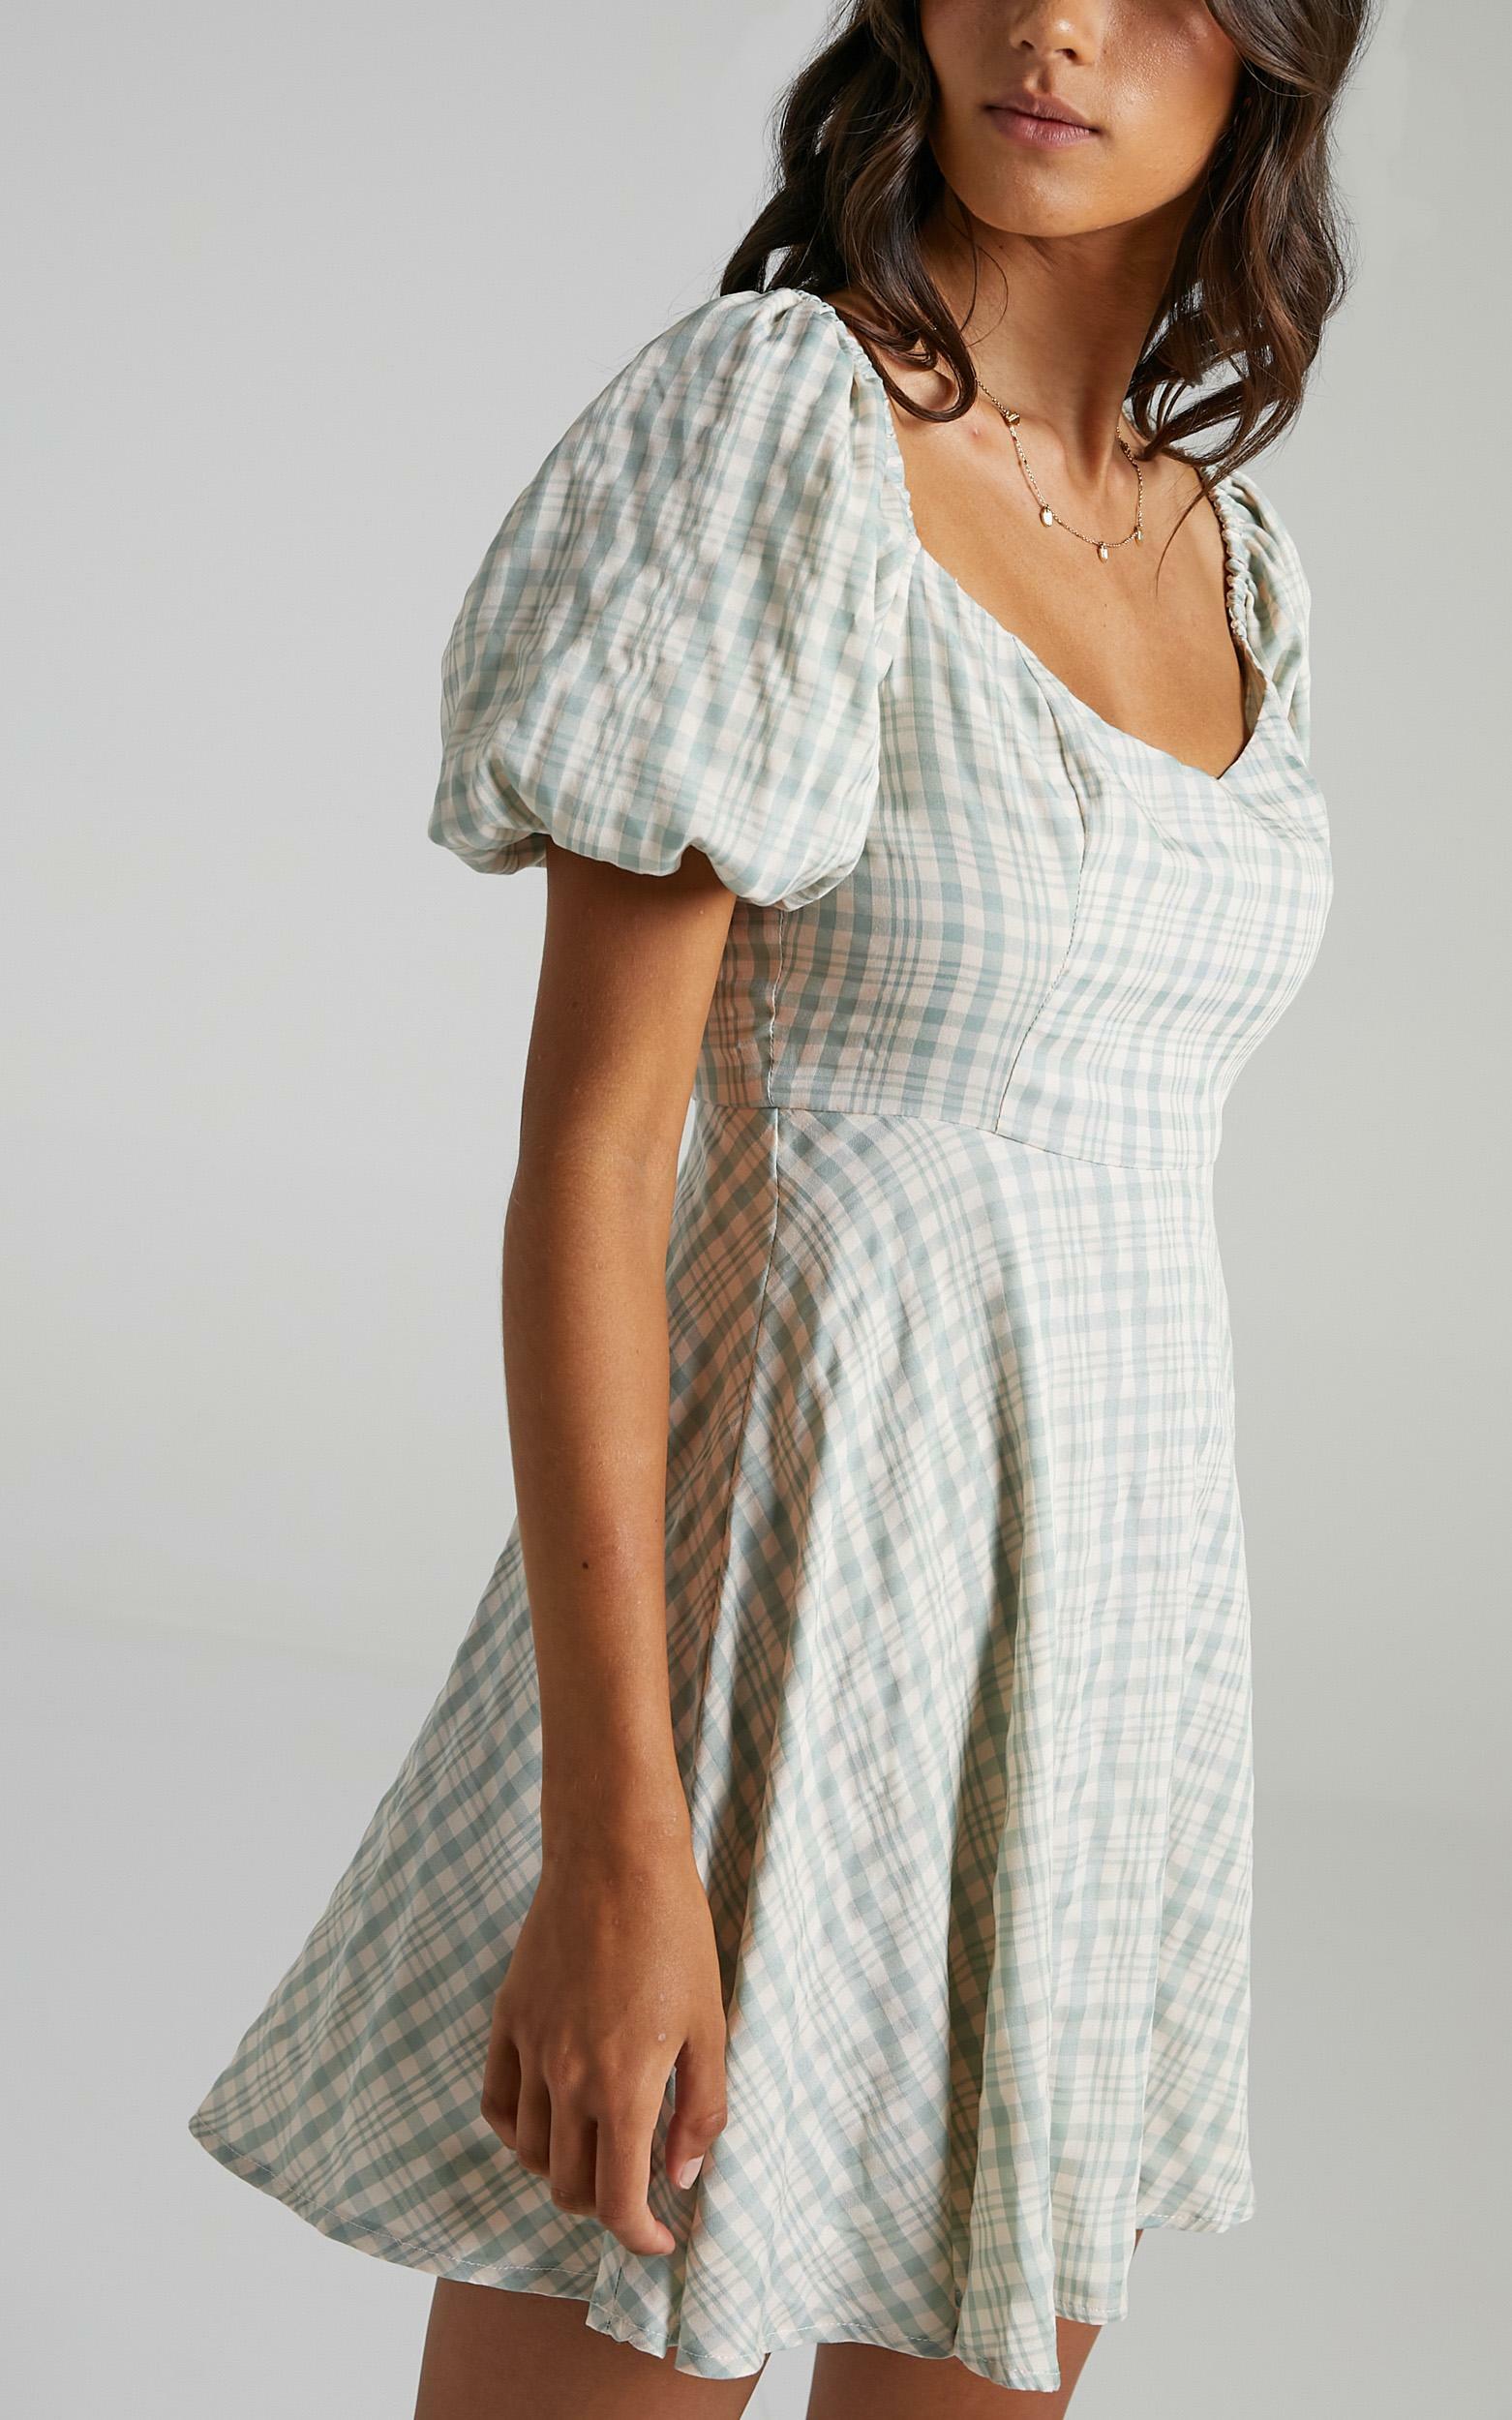 Gloin Dress in Sage Check - 04, GRN2, hi-res image number null